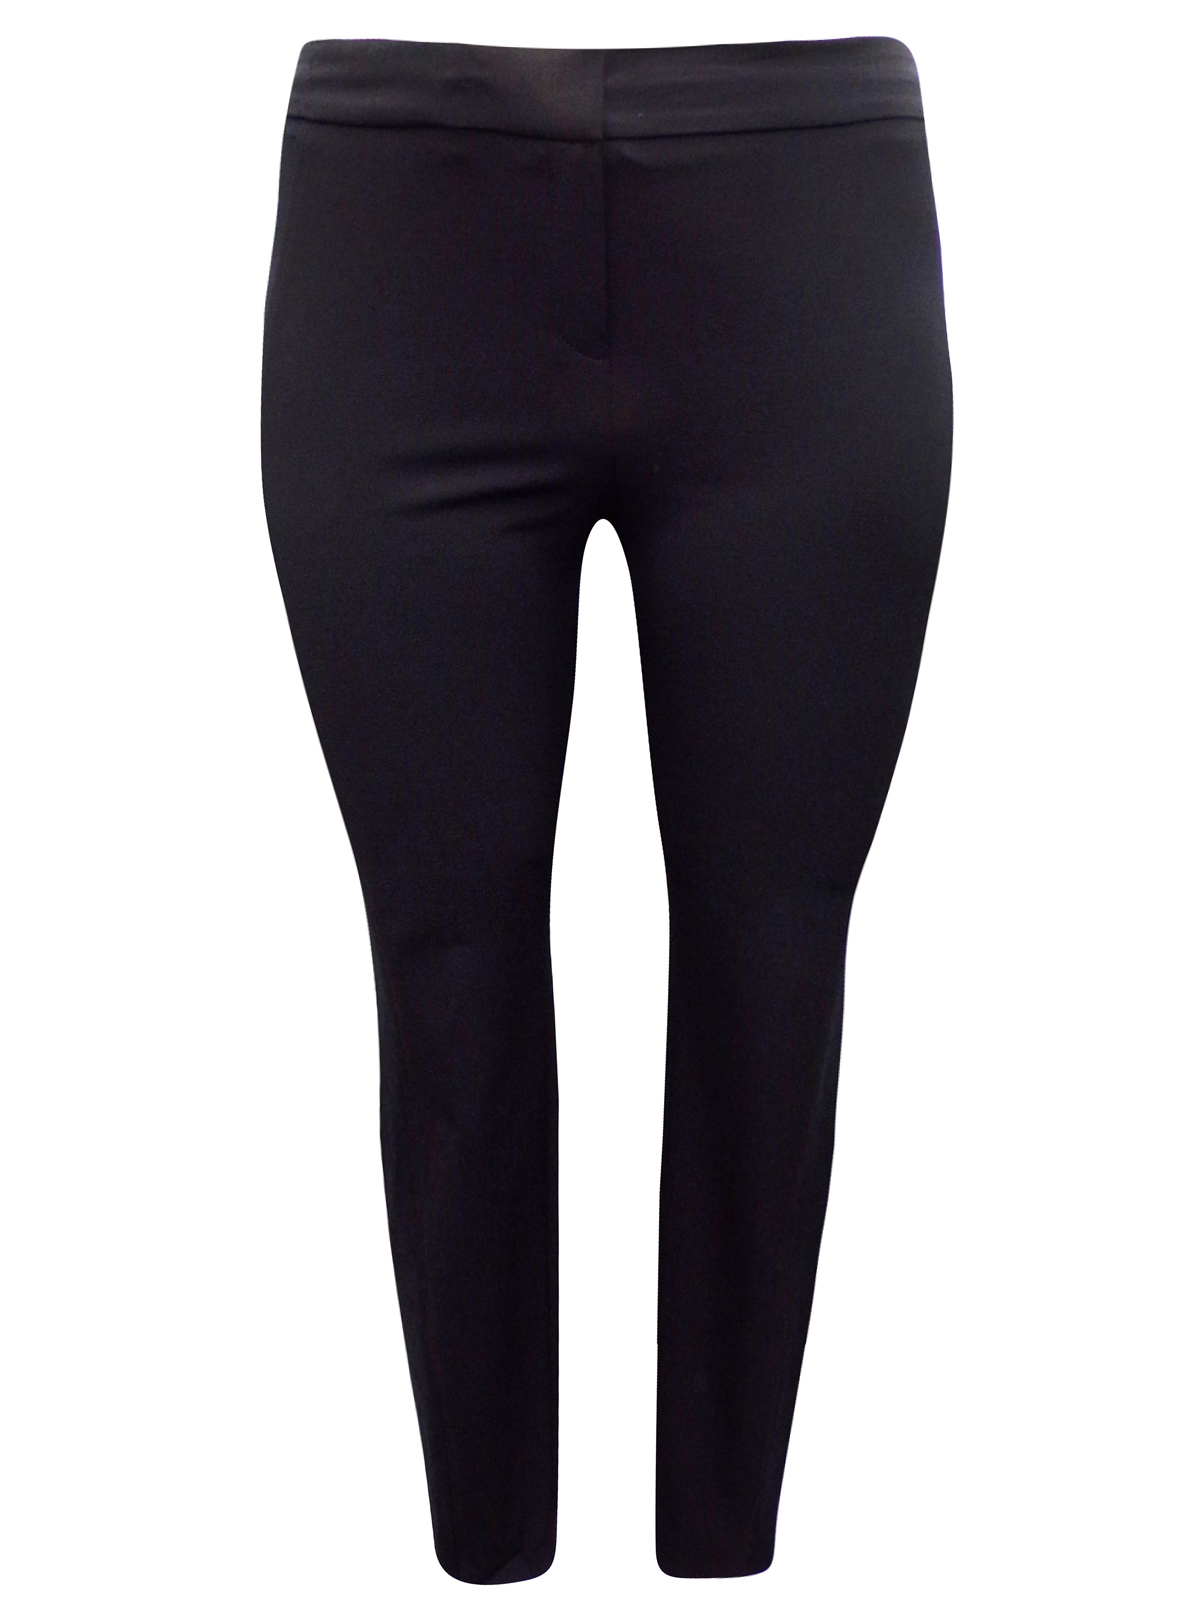 Marks and Spencer - - M&5 BLACK Panelled Ponte Treggings - Size 14 to 24